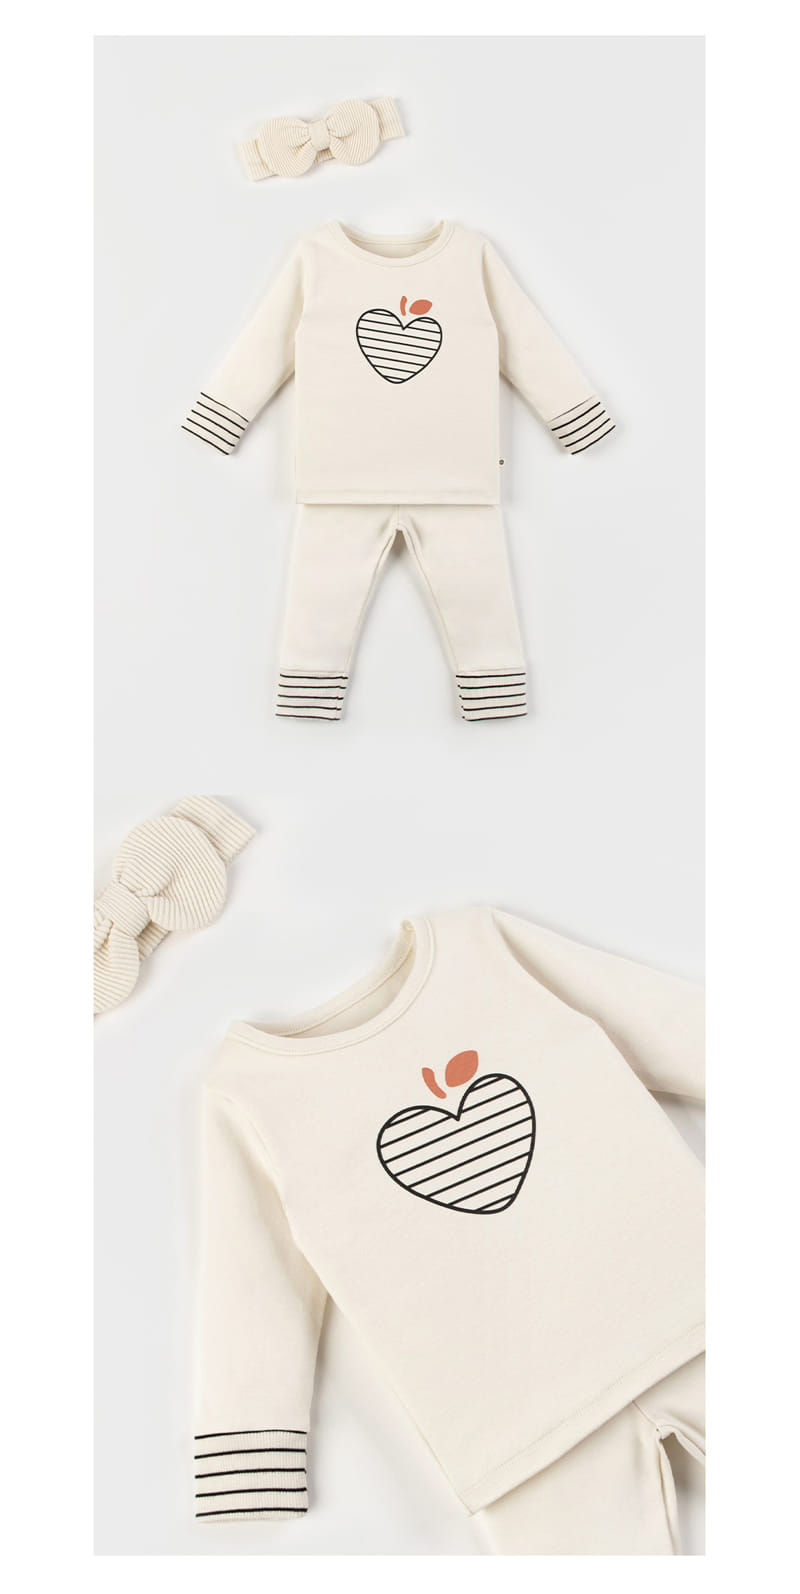 Kids Clara - Korean Baby Fashion - #onlinebabyshop - Molang Compy Belly Baby Easy Wear - 4